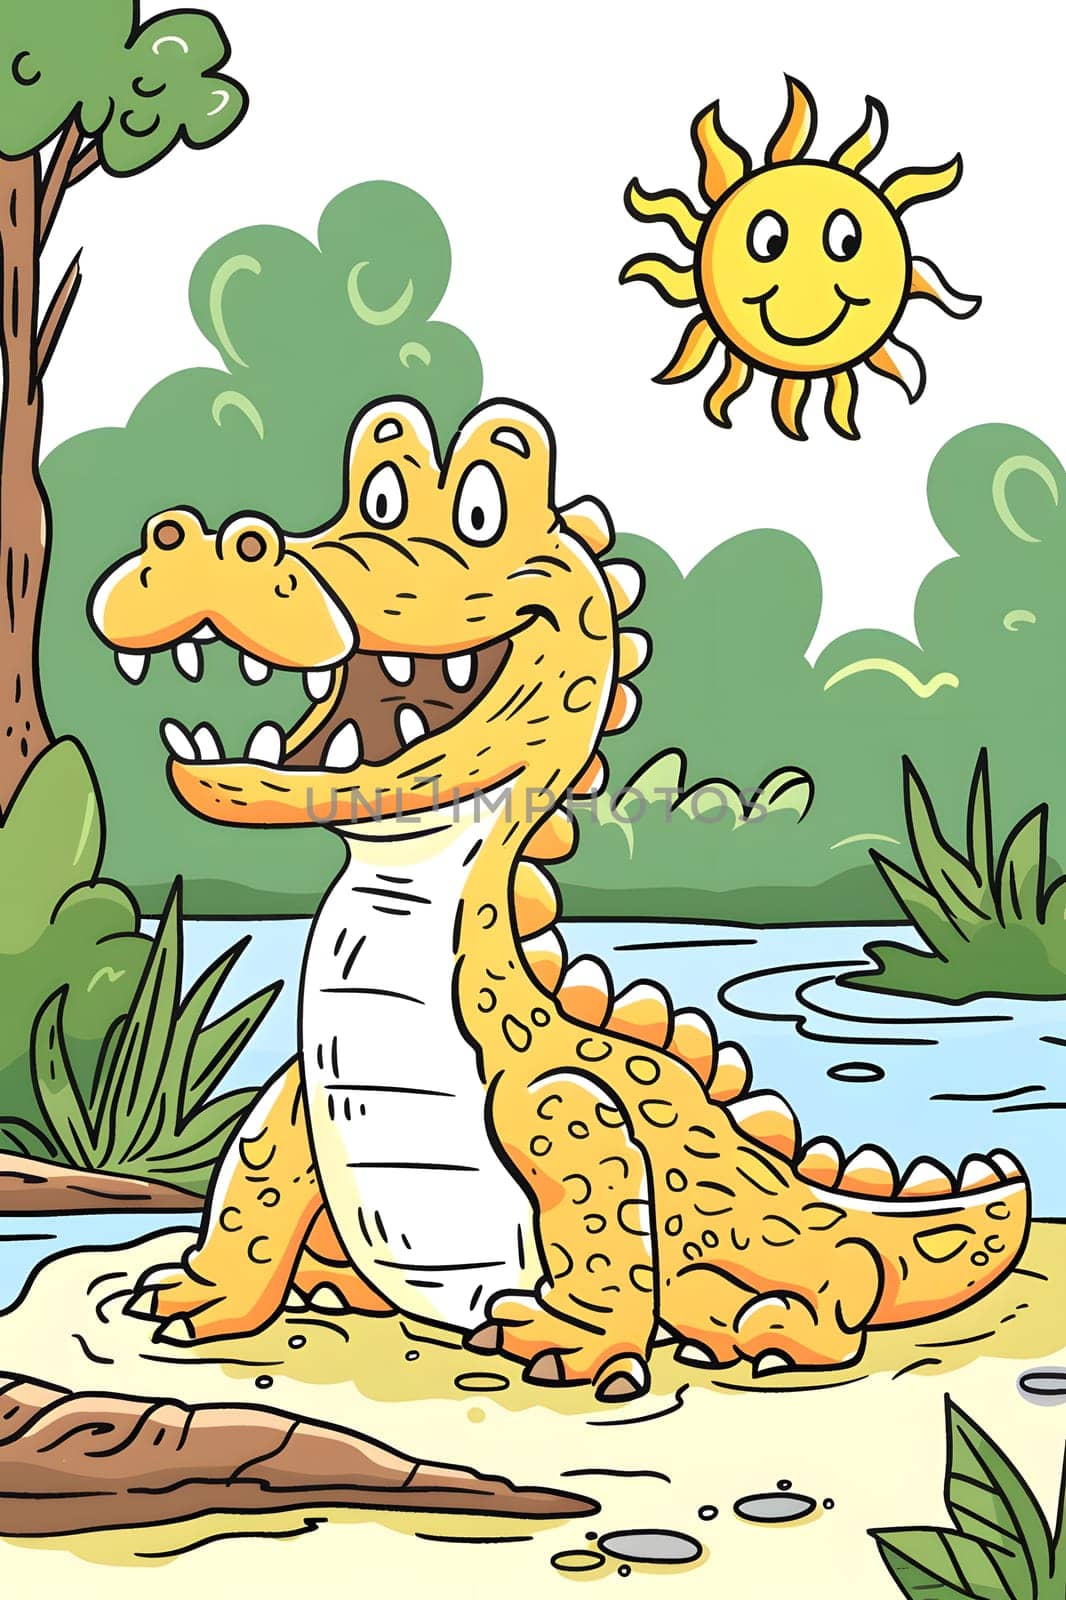 Happy cartoon crocodile in natural environment with smiling sun by river by Nadtochiy